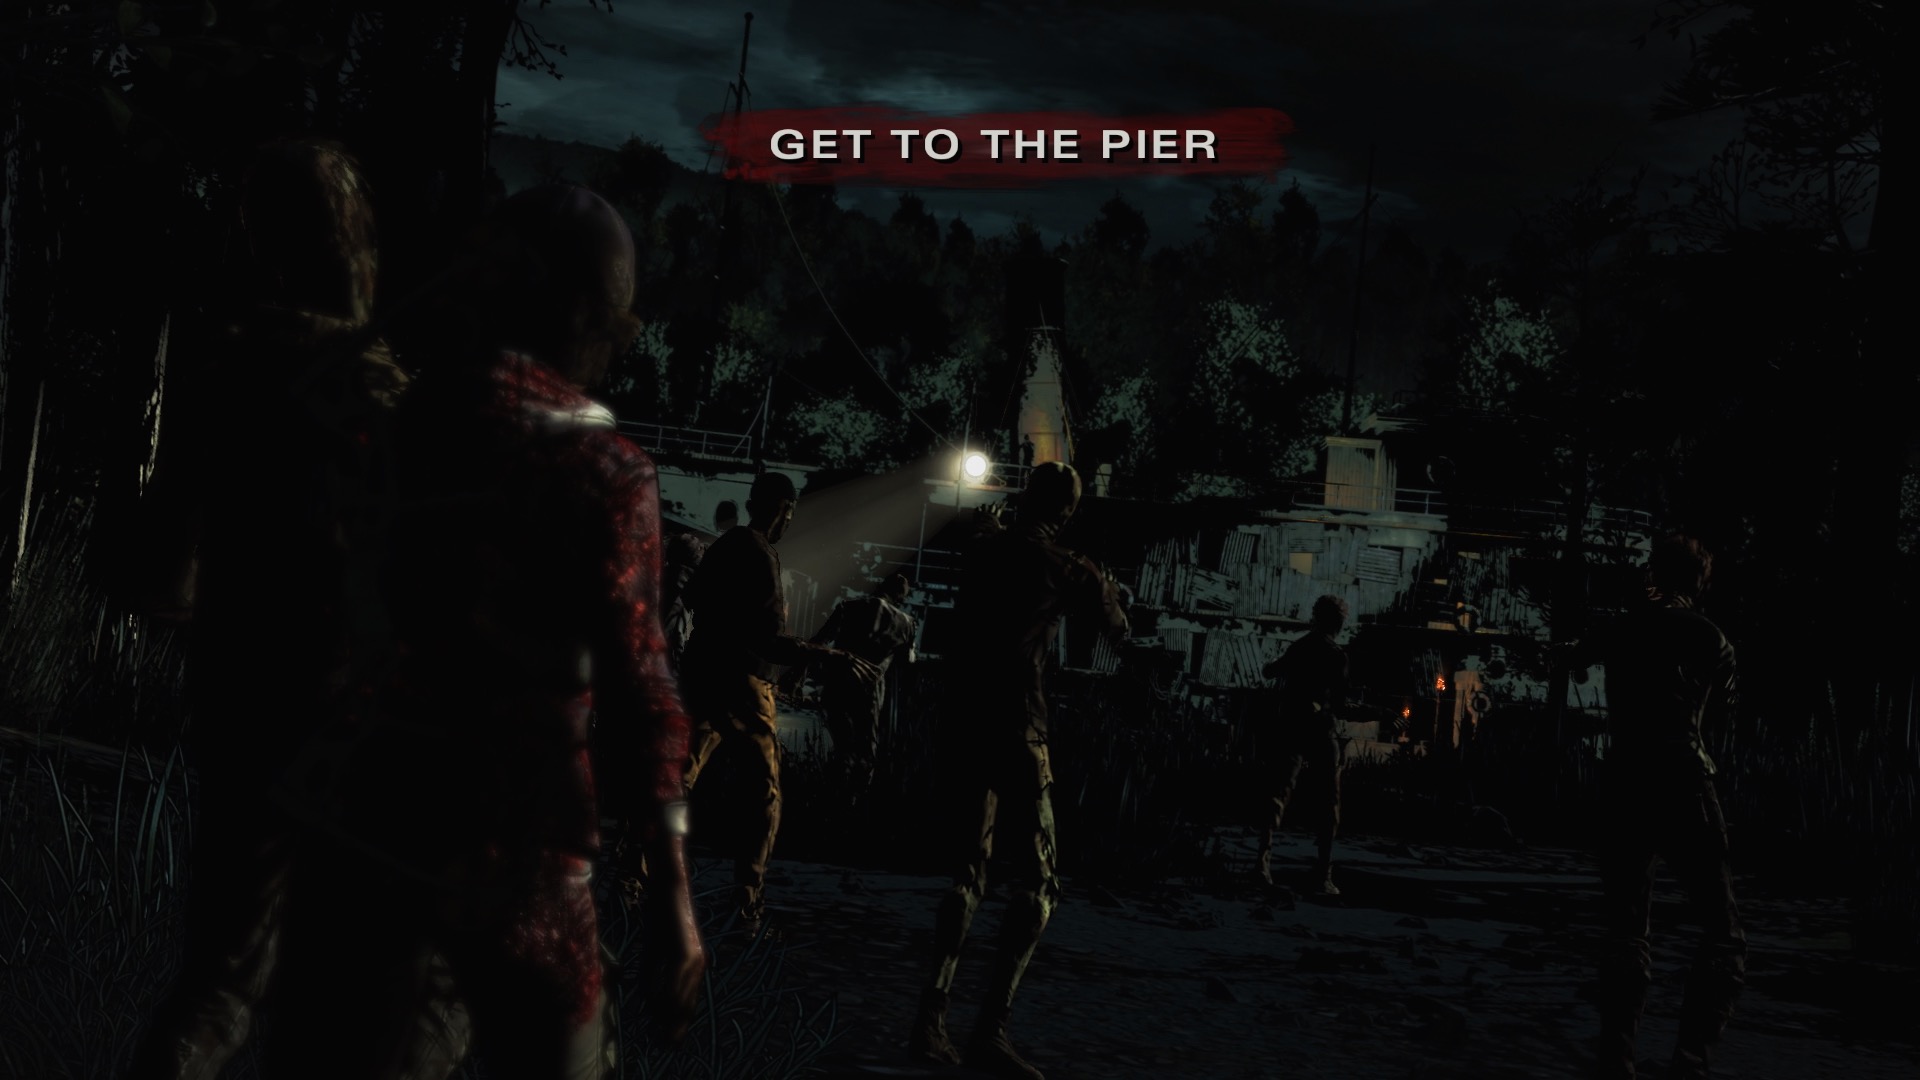 The Walking Dead: Get to the Pier